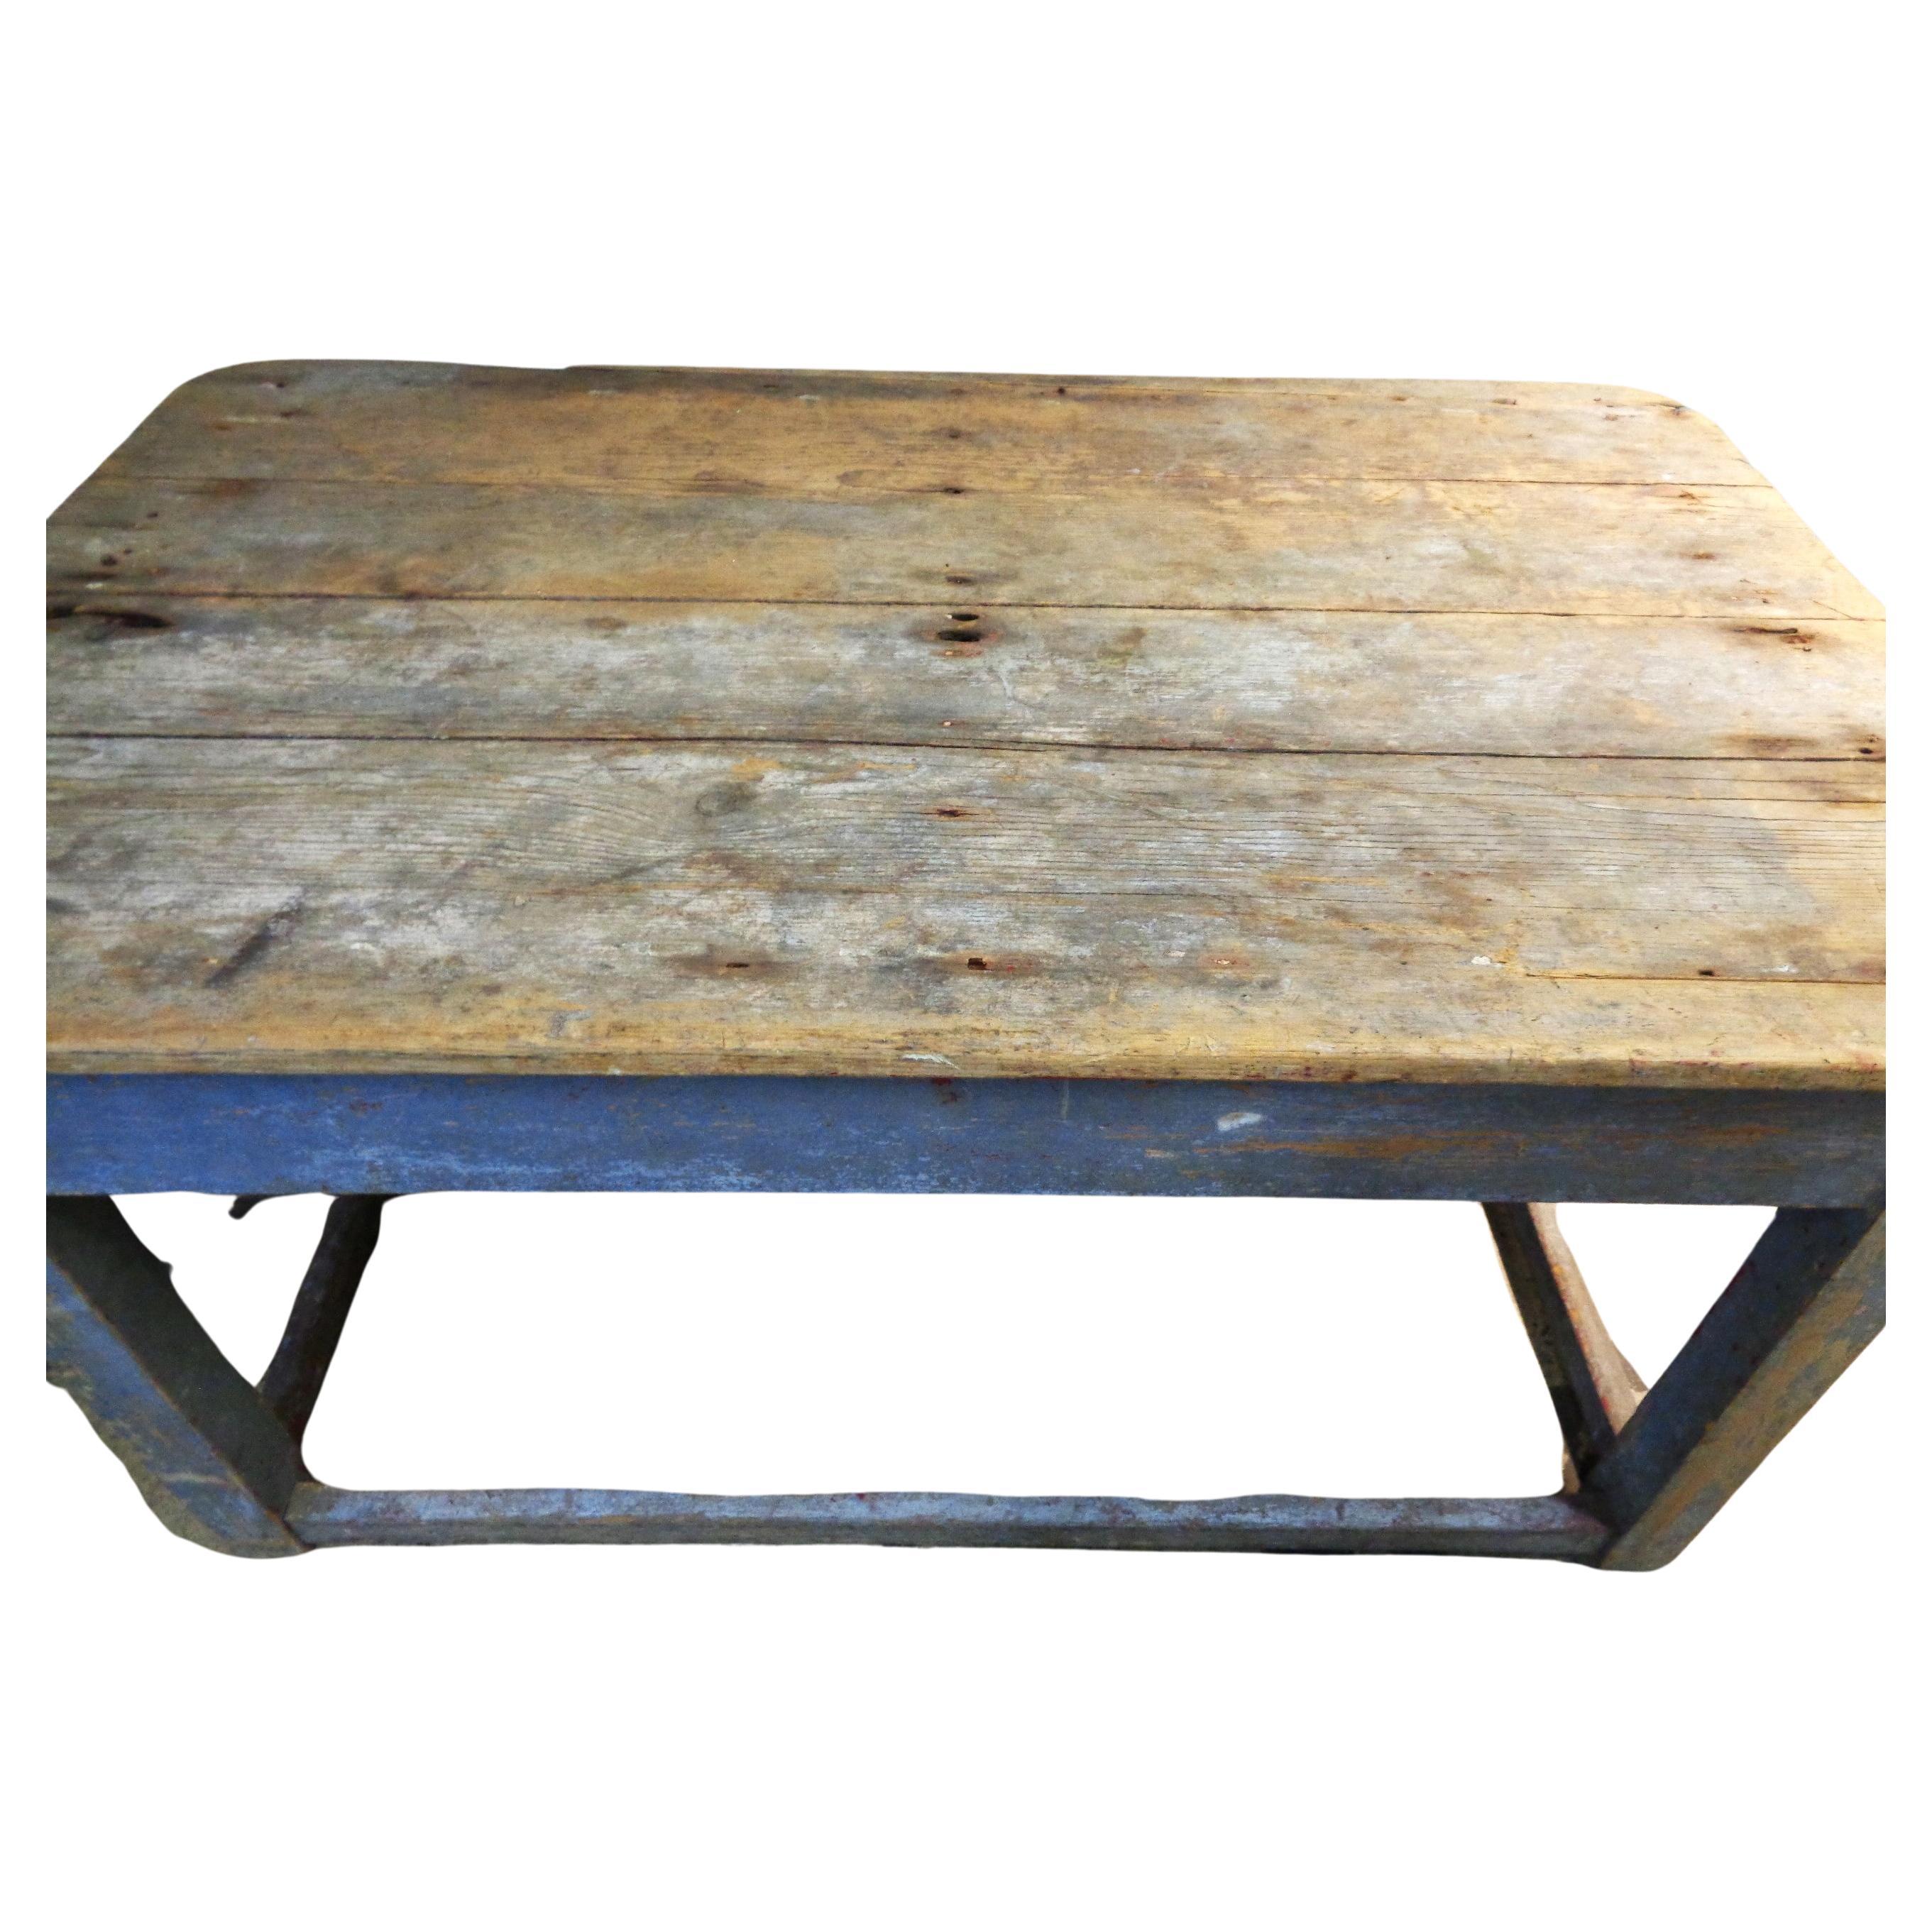 Hand-Crafted  Early 19th Century Original Blue Painted Rustic Work Table  For Sale